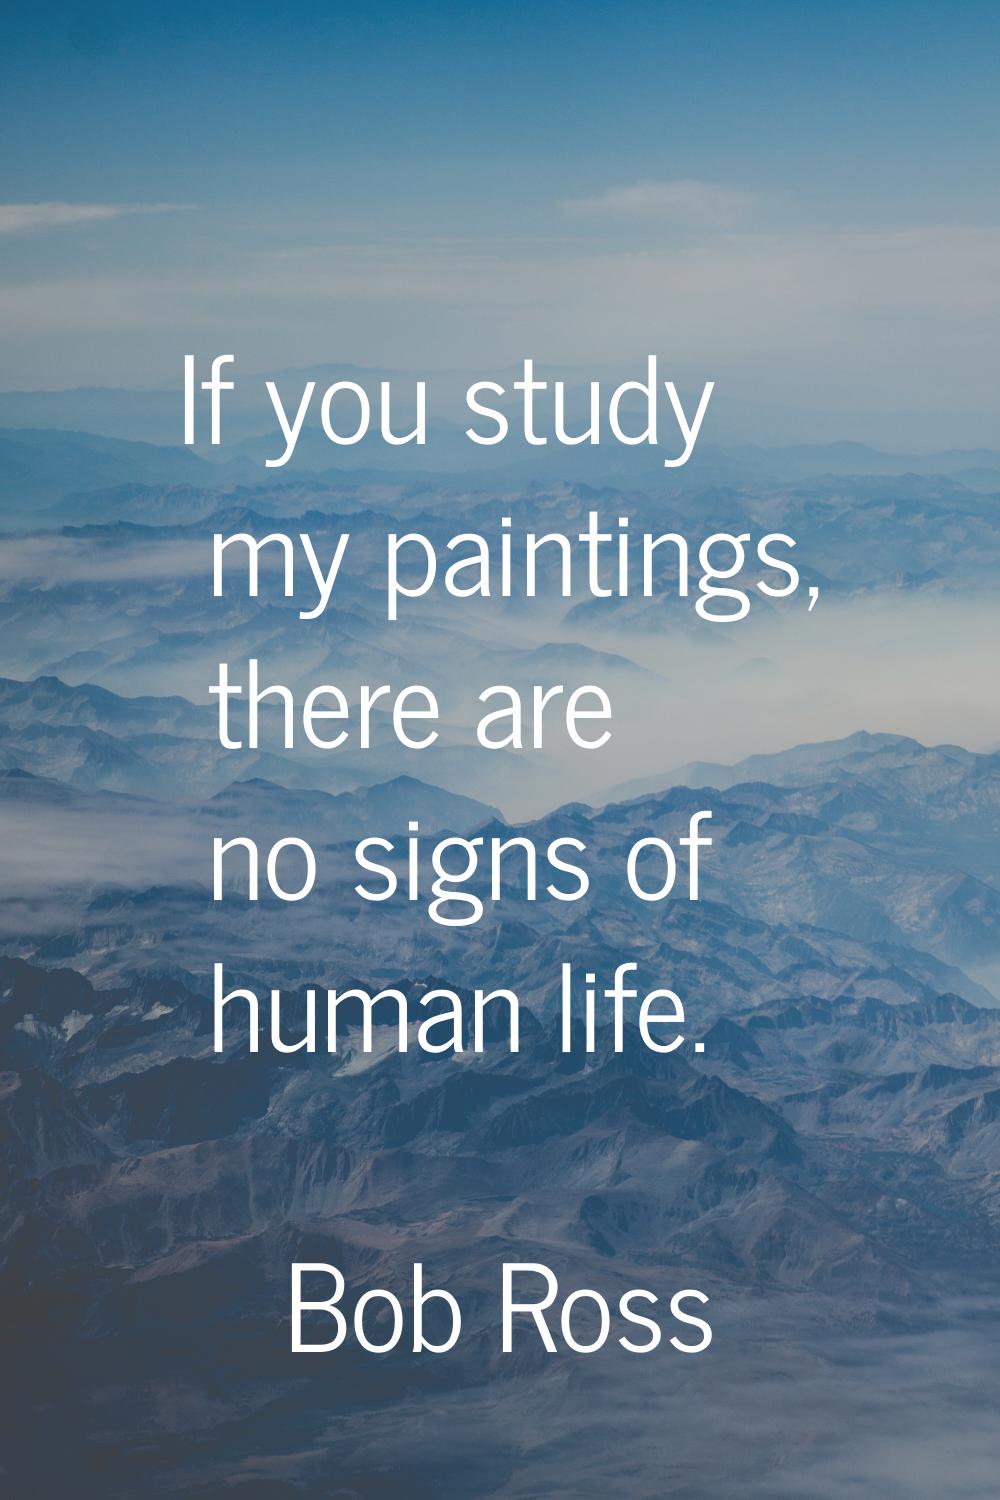 If you study my paintings, there are no signs of human life.